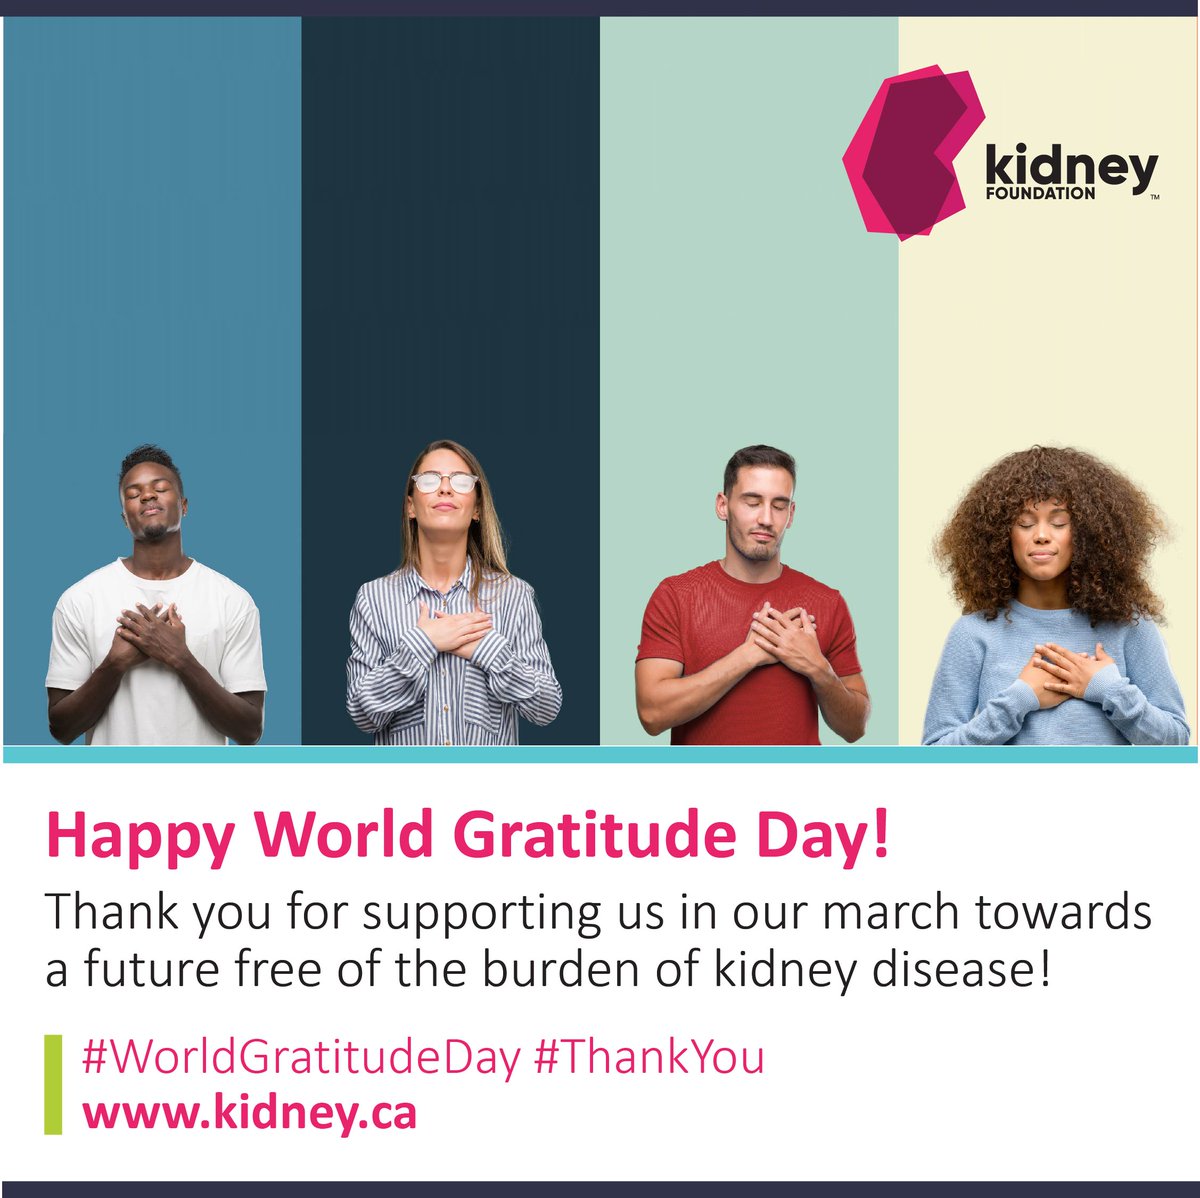 Happy #WorldGratitudeDay! Today, we express how deeply thankful we are for everyone who supports #TheKidneyFoundation. Thanks to your generosity and compassion, each day, we get closer to a future free of the burden of #kidneydisease. See your impact here: kidney.ca/About-Us/Overv…